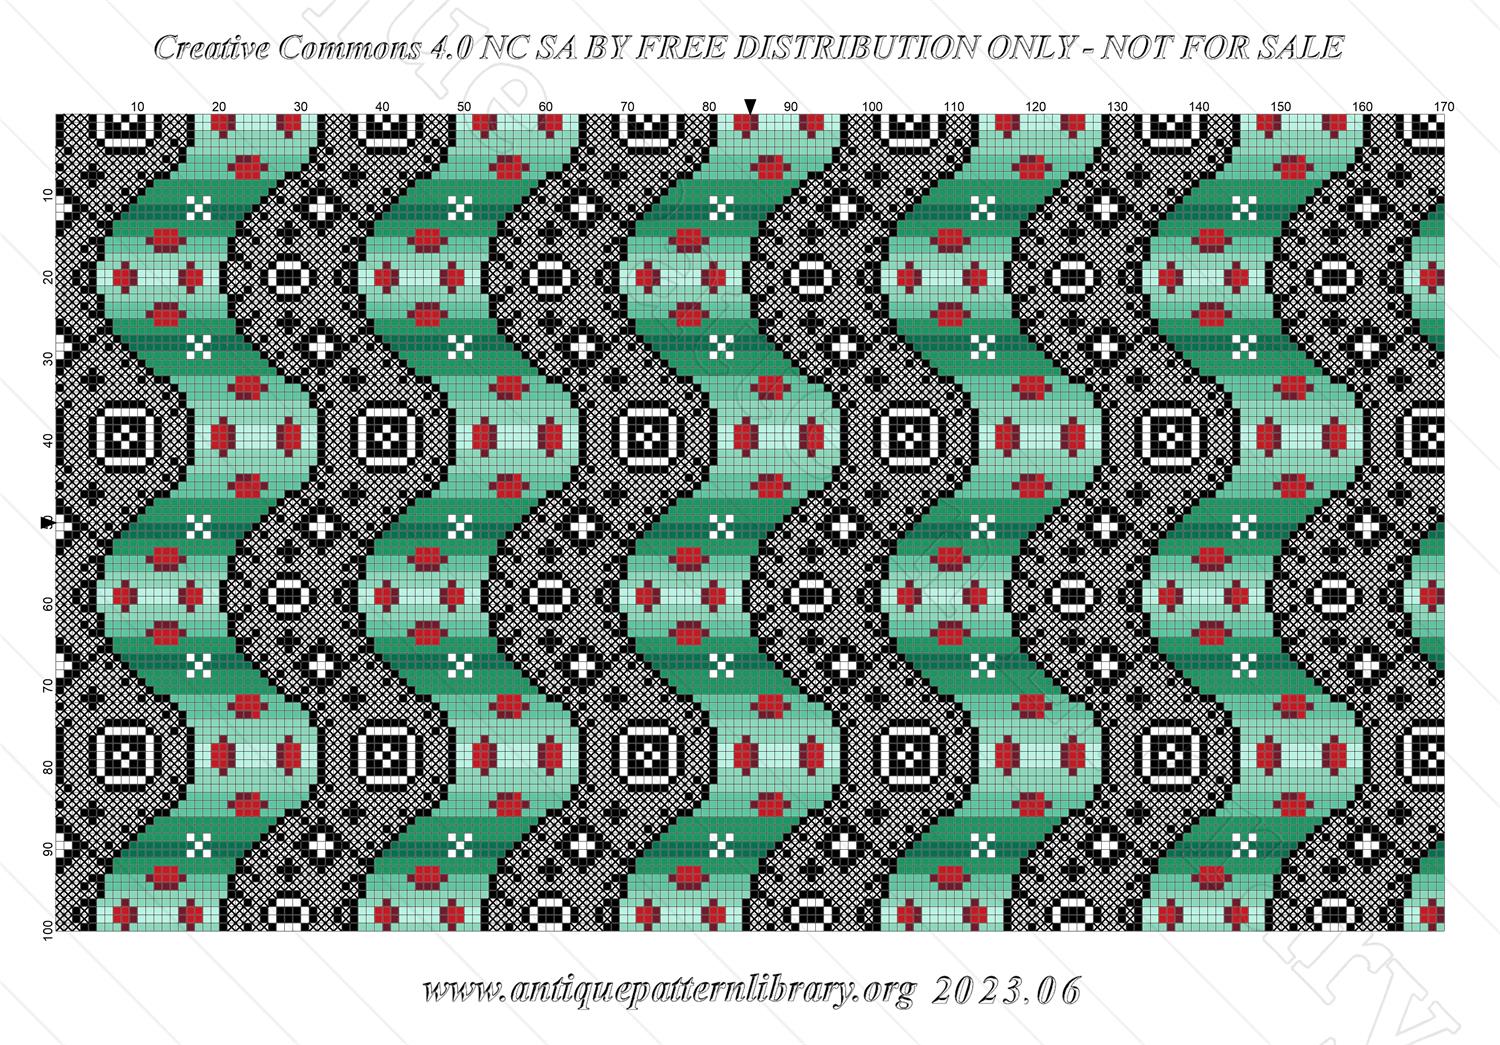 I-ES006 Two repeating patterns